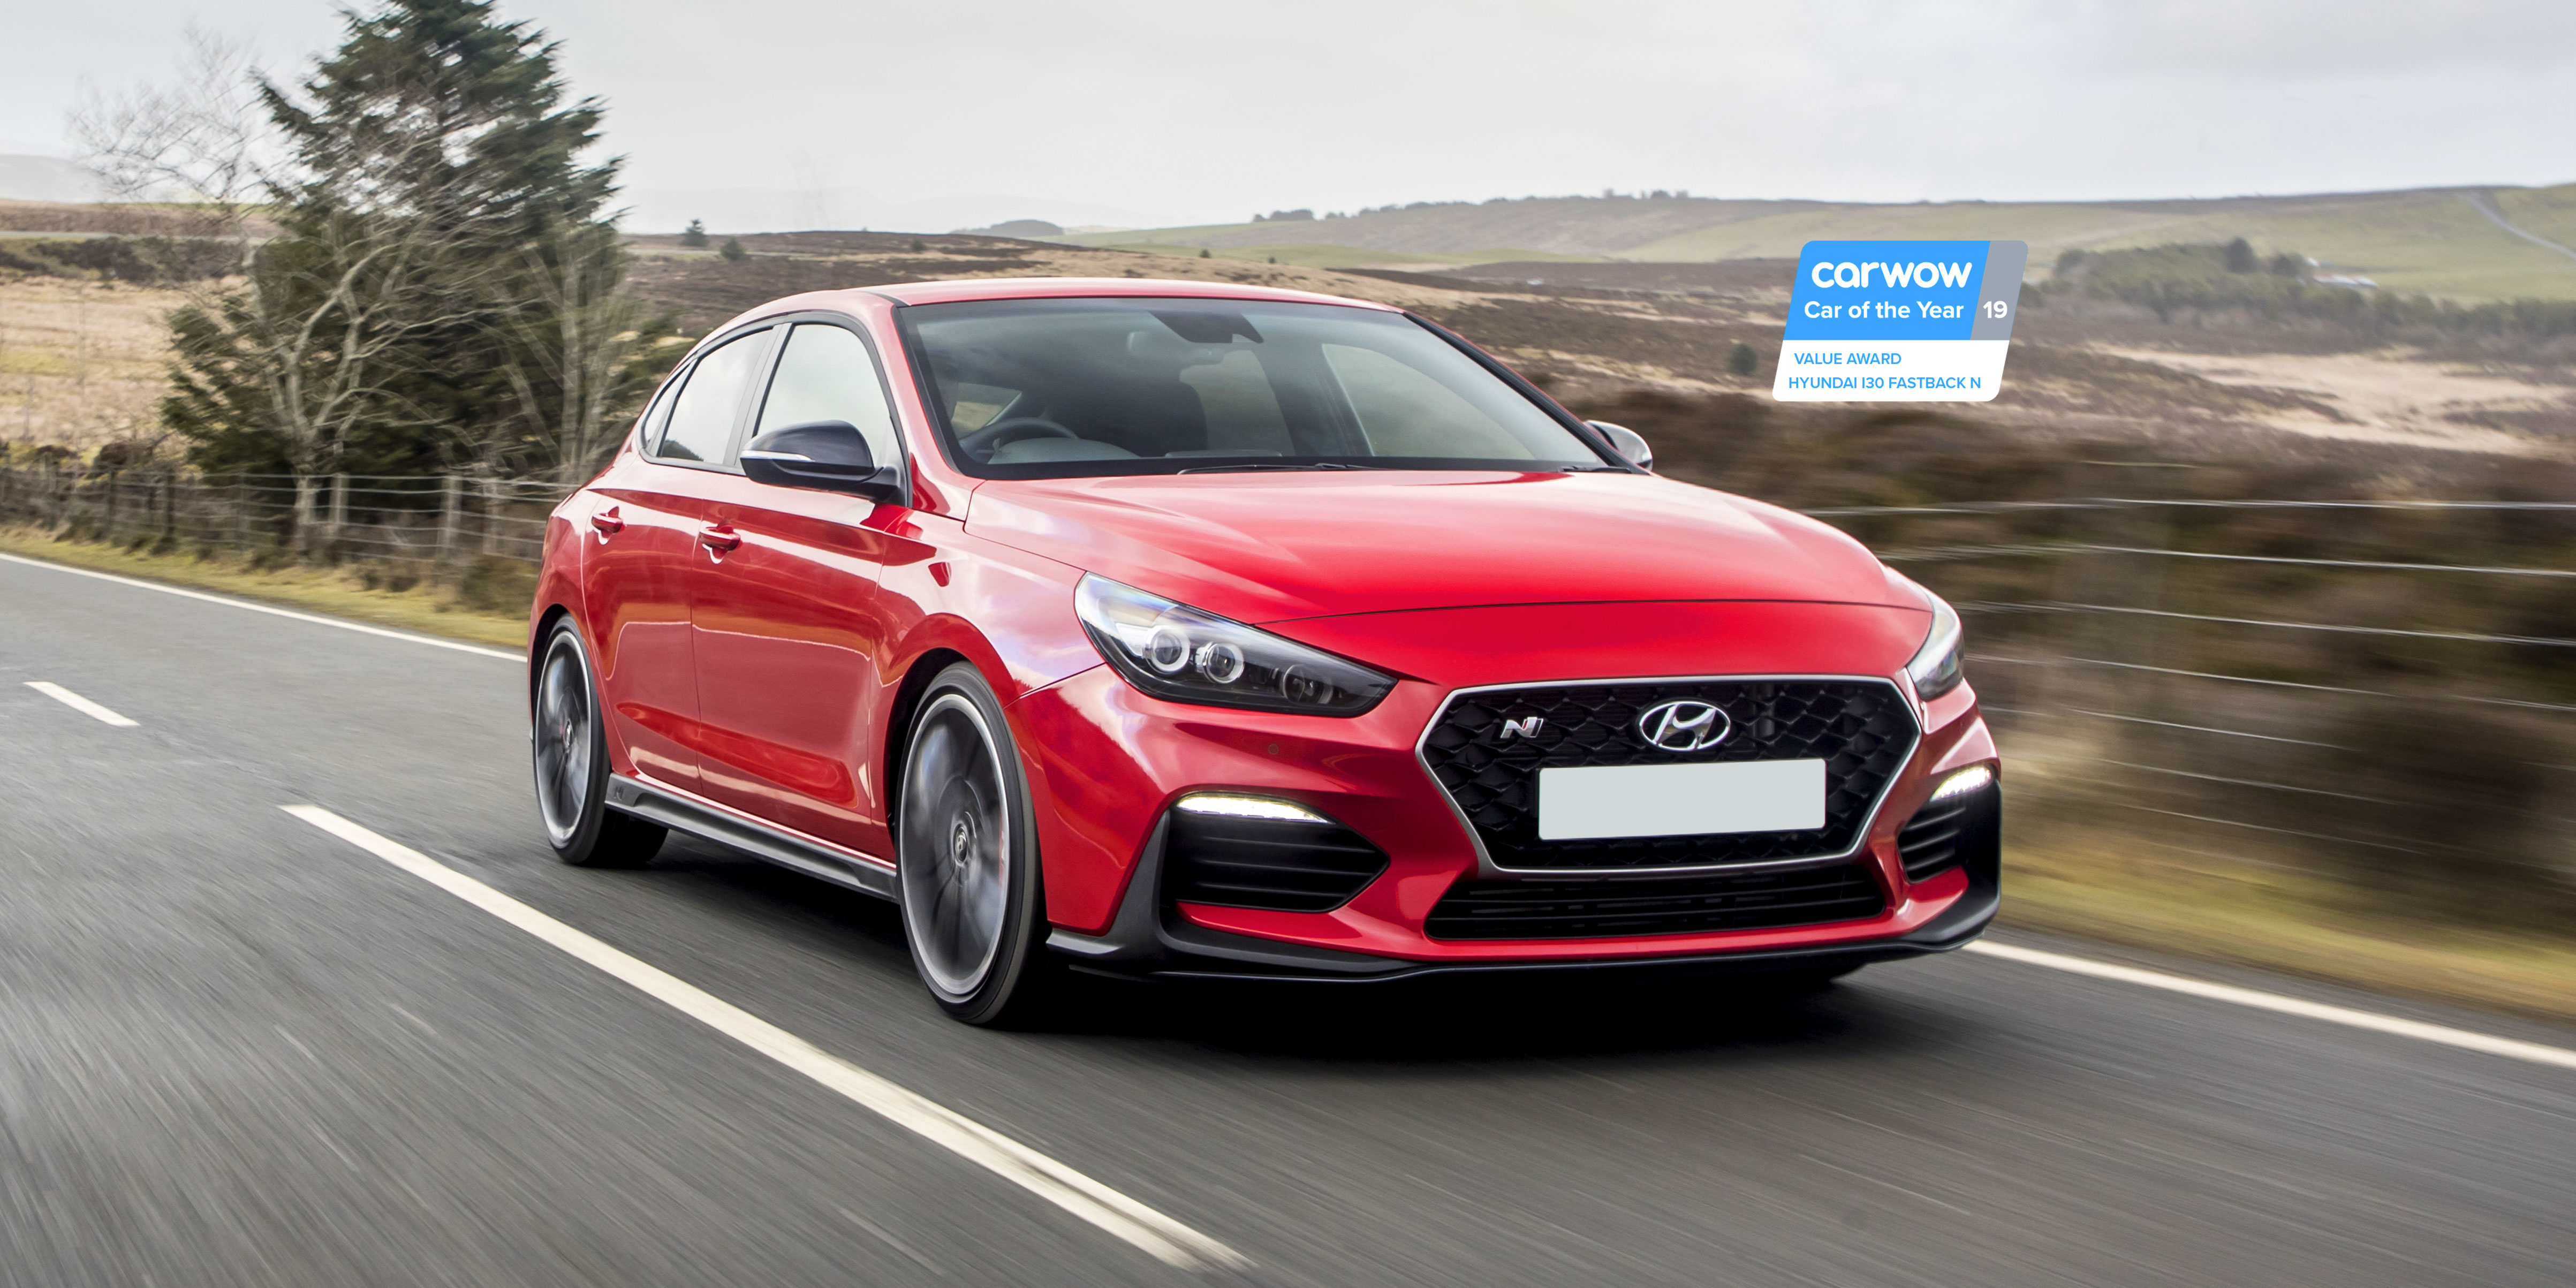 New Hyundai i30 Fastback N (2017-2020) Review, Drive, Specs & Pricing